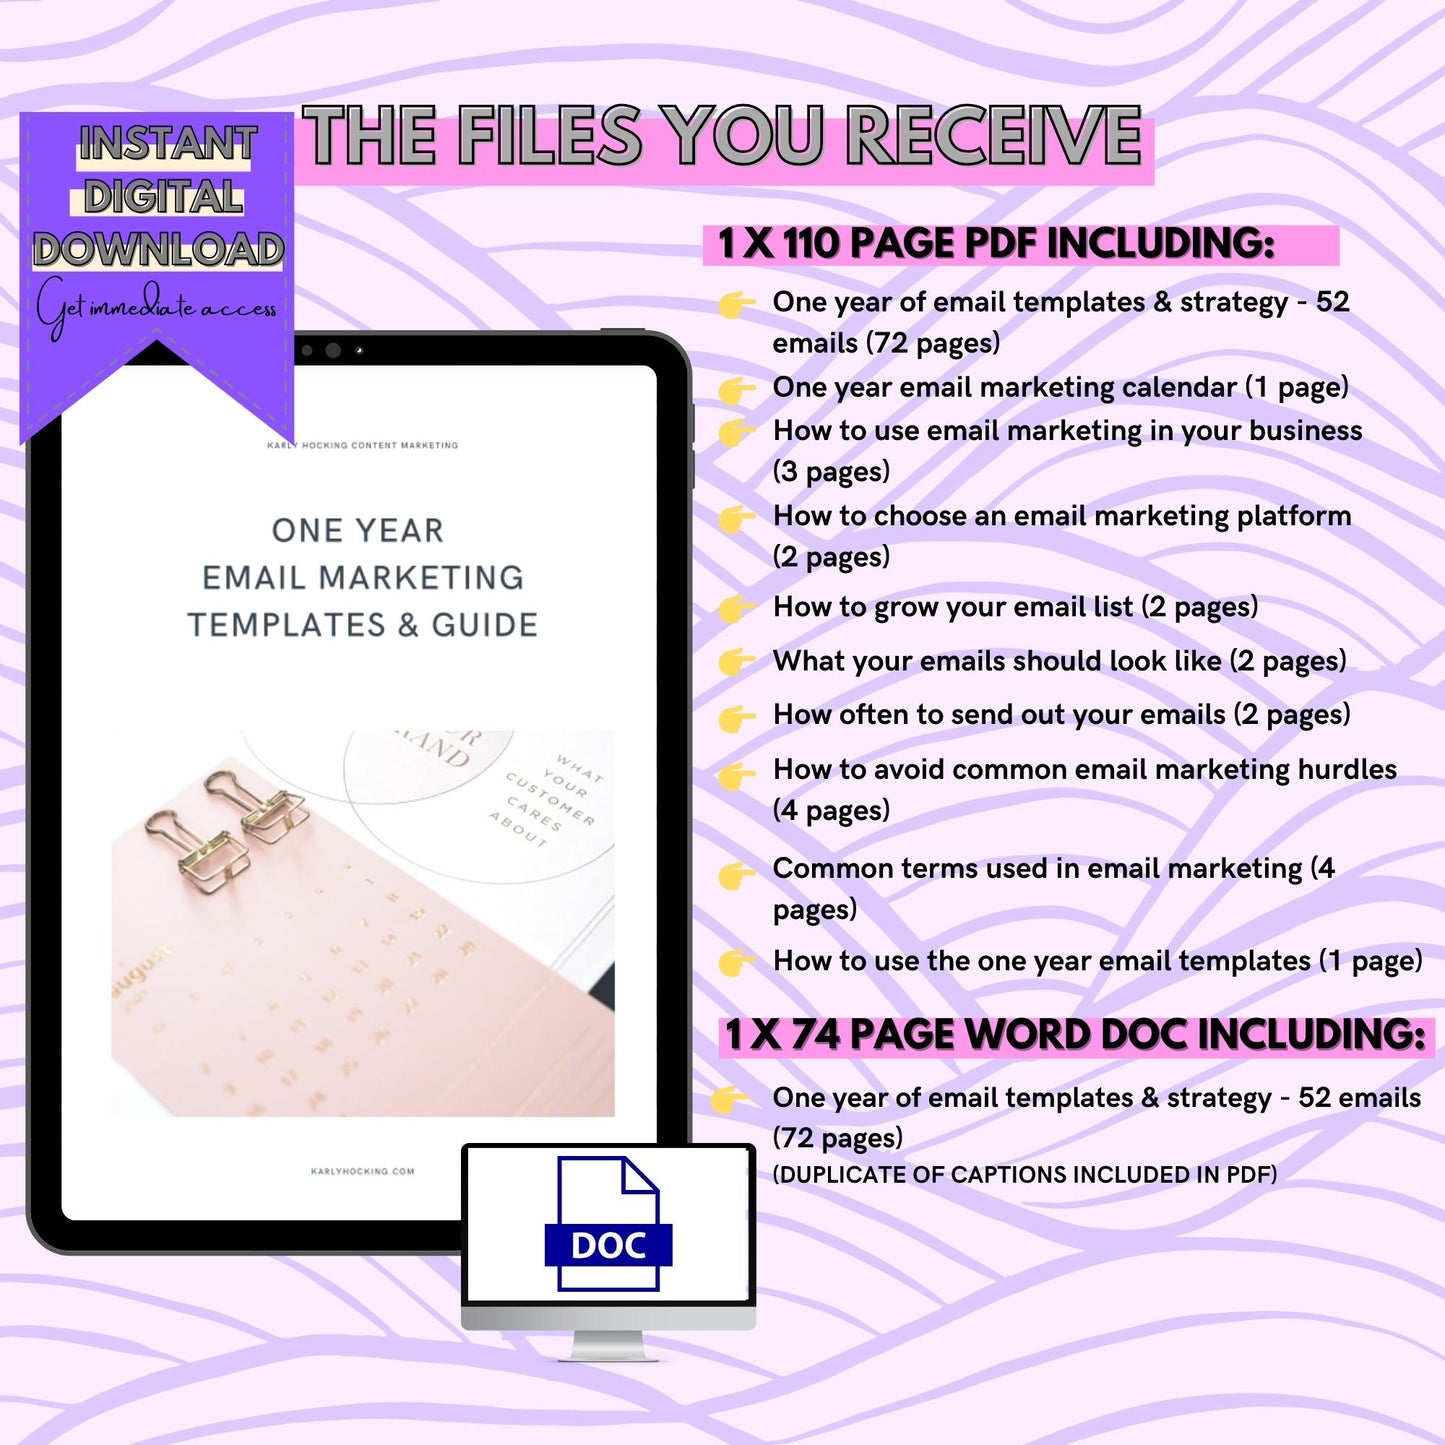 One Year Email Marketing Kit - Instant download